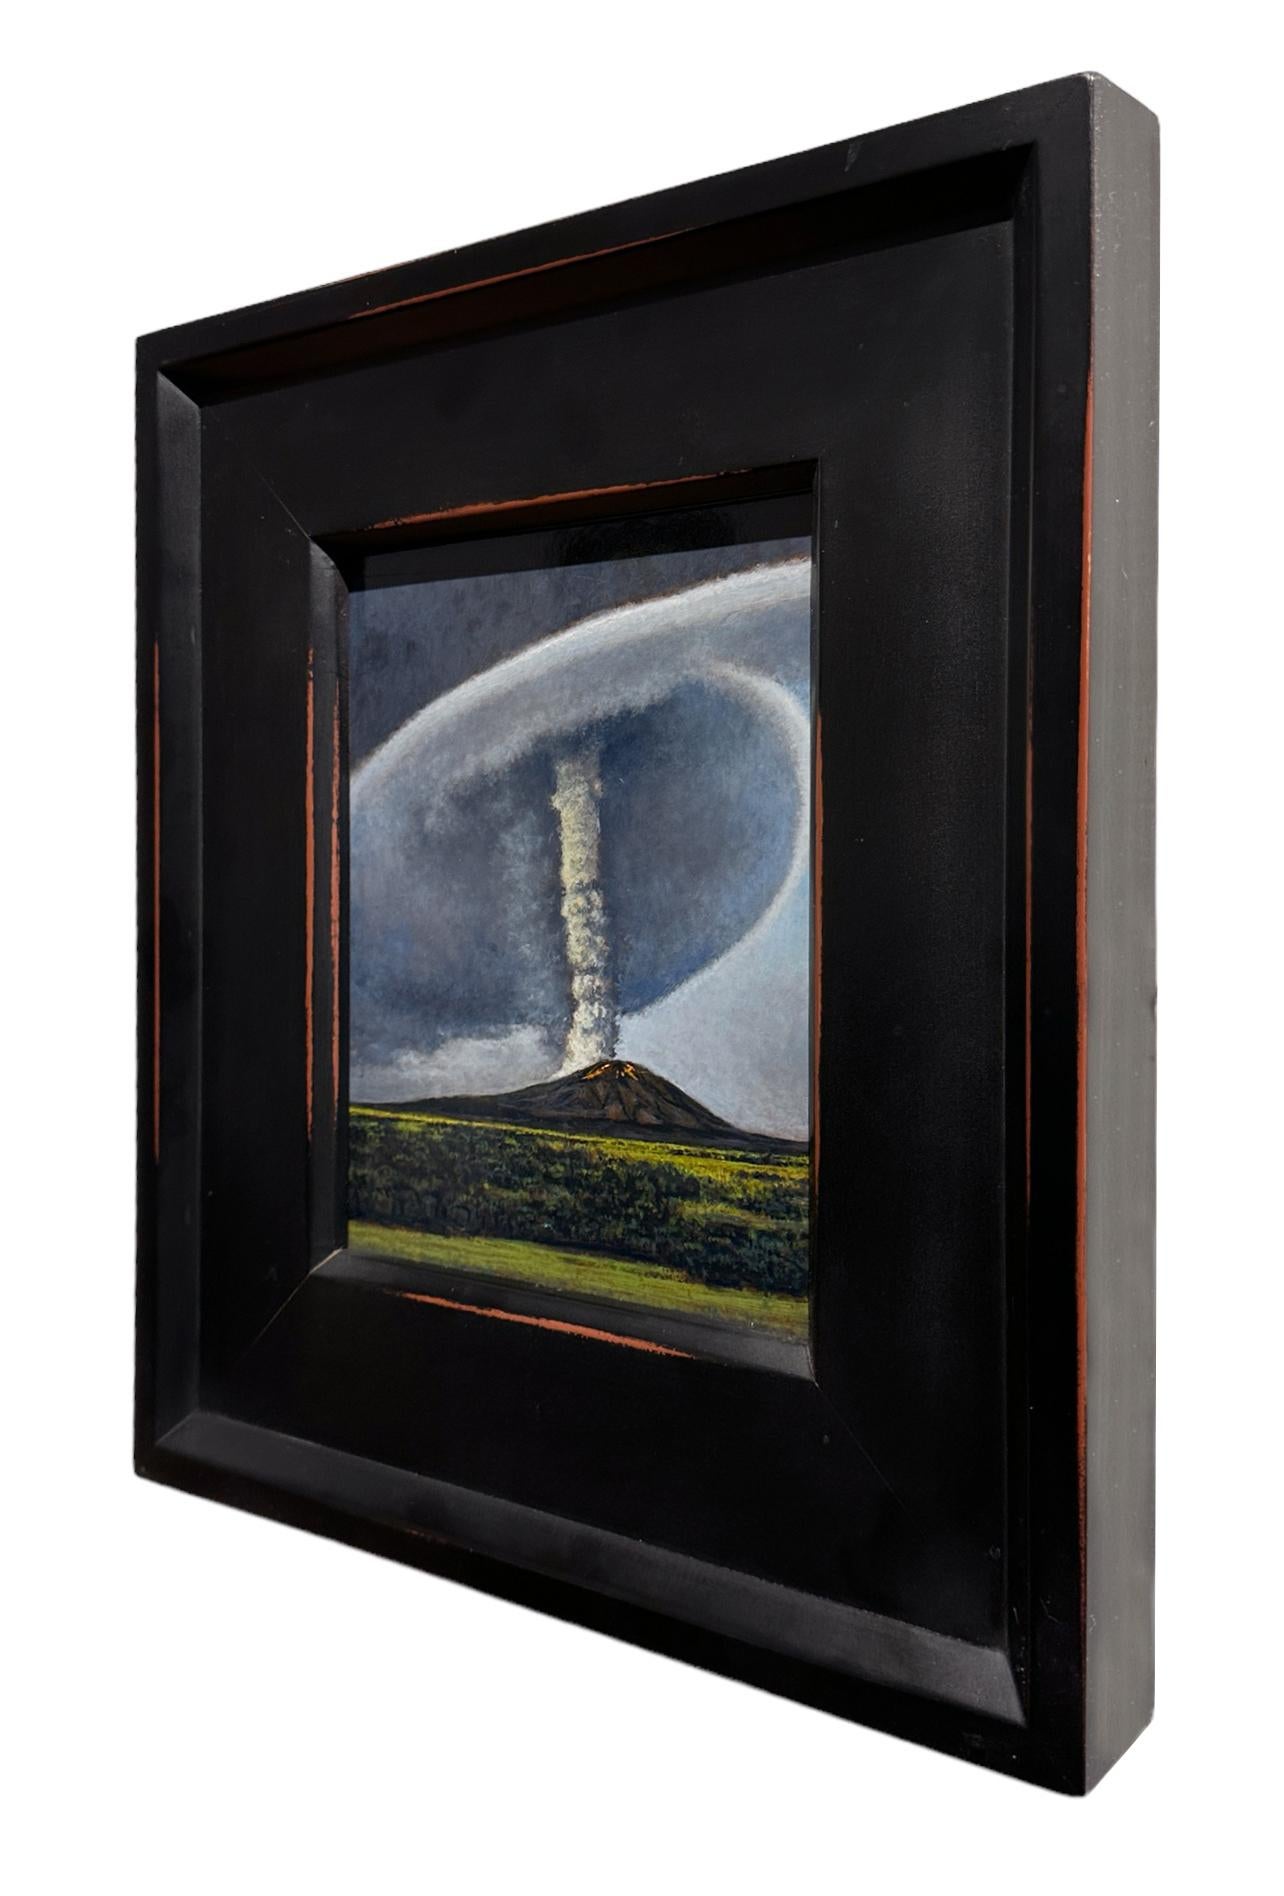 Volcano - Erupting Volcano with Swirling Cloud of Ash, Framed Oil Painting For Sale 2